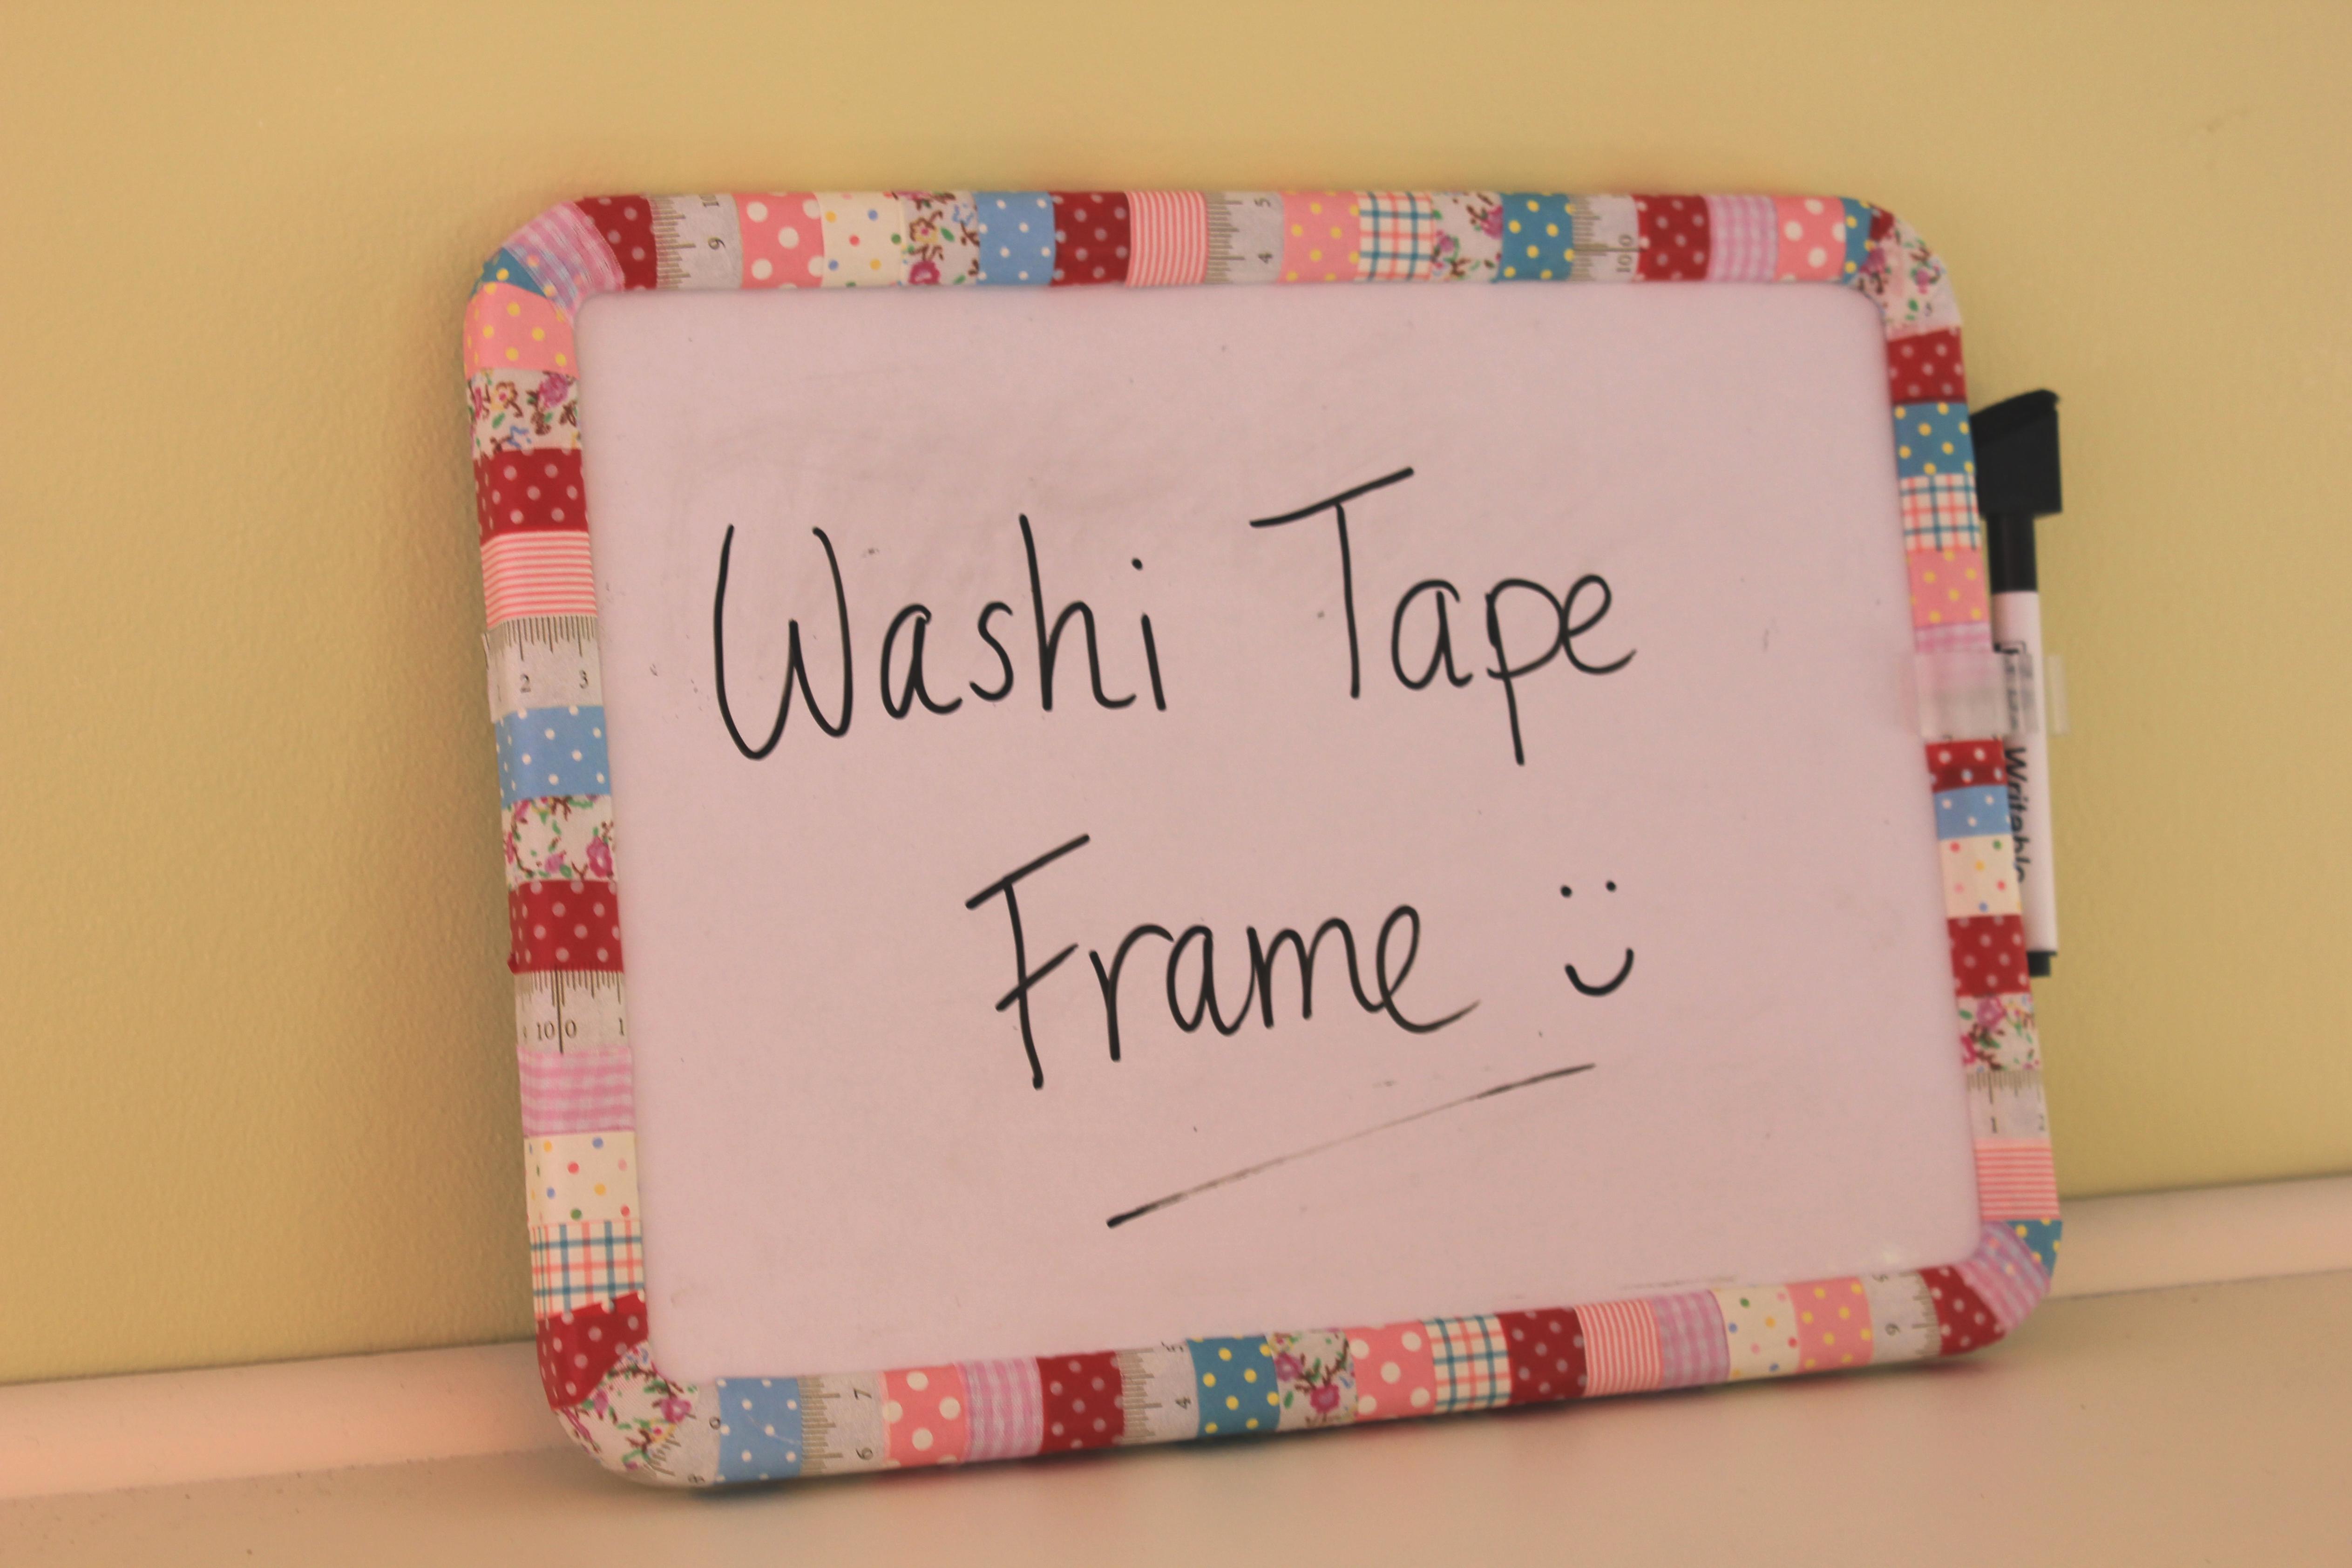 paper craft DIY project washi tape frame by cassiefairy